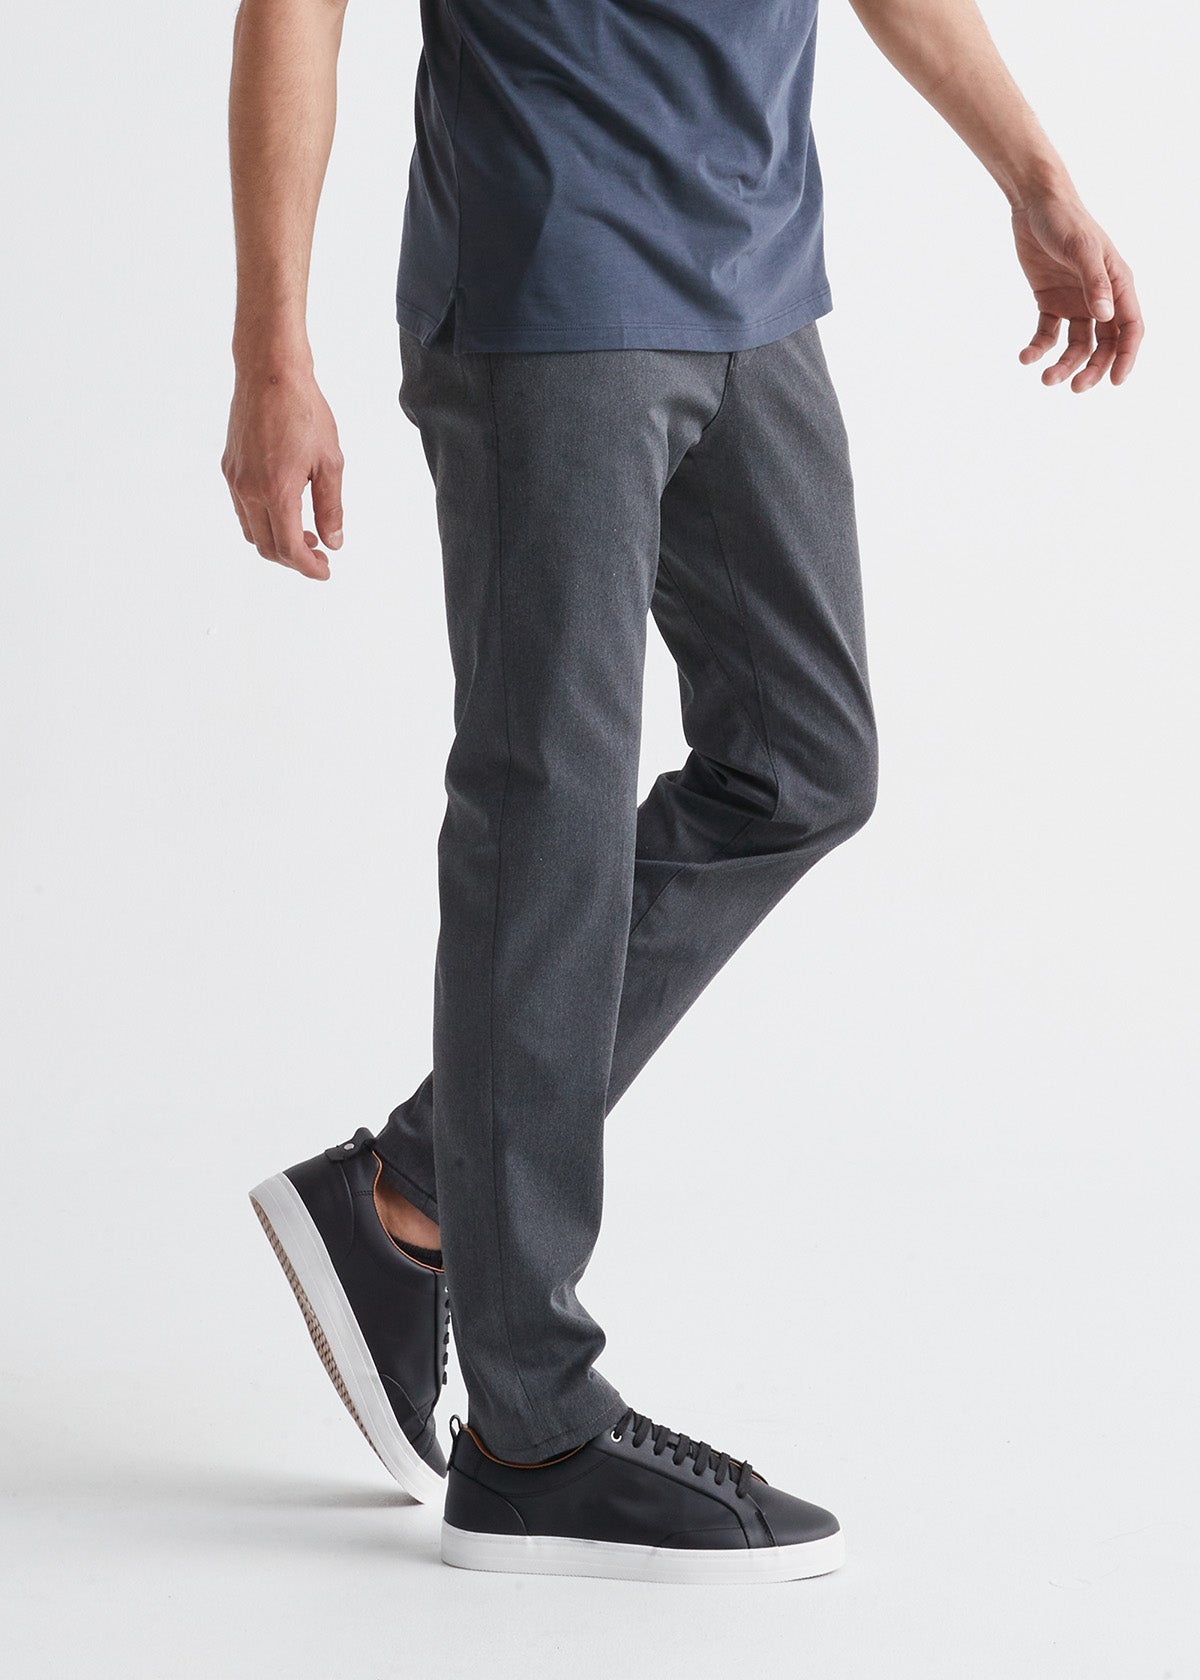 Relaxed Slim Stretch Pleated Tailored Pant - Light Grey, Suit Pants